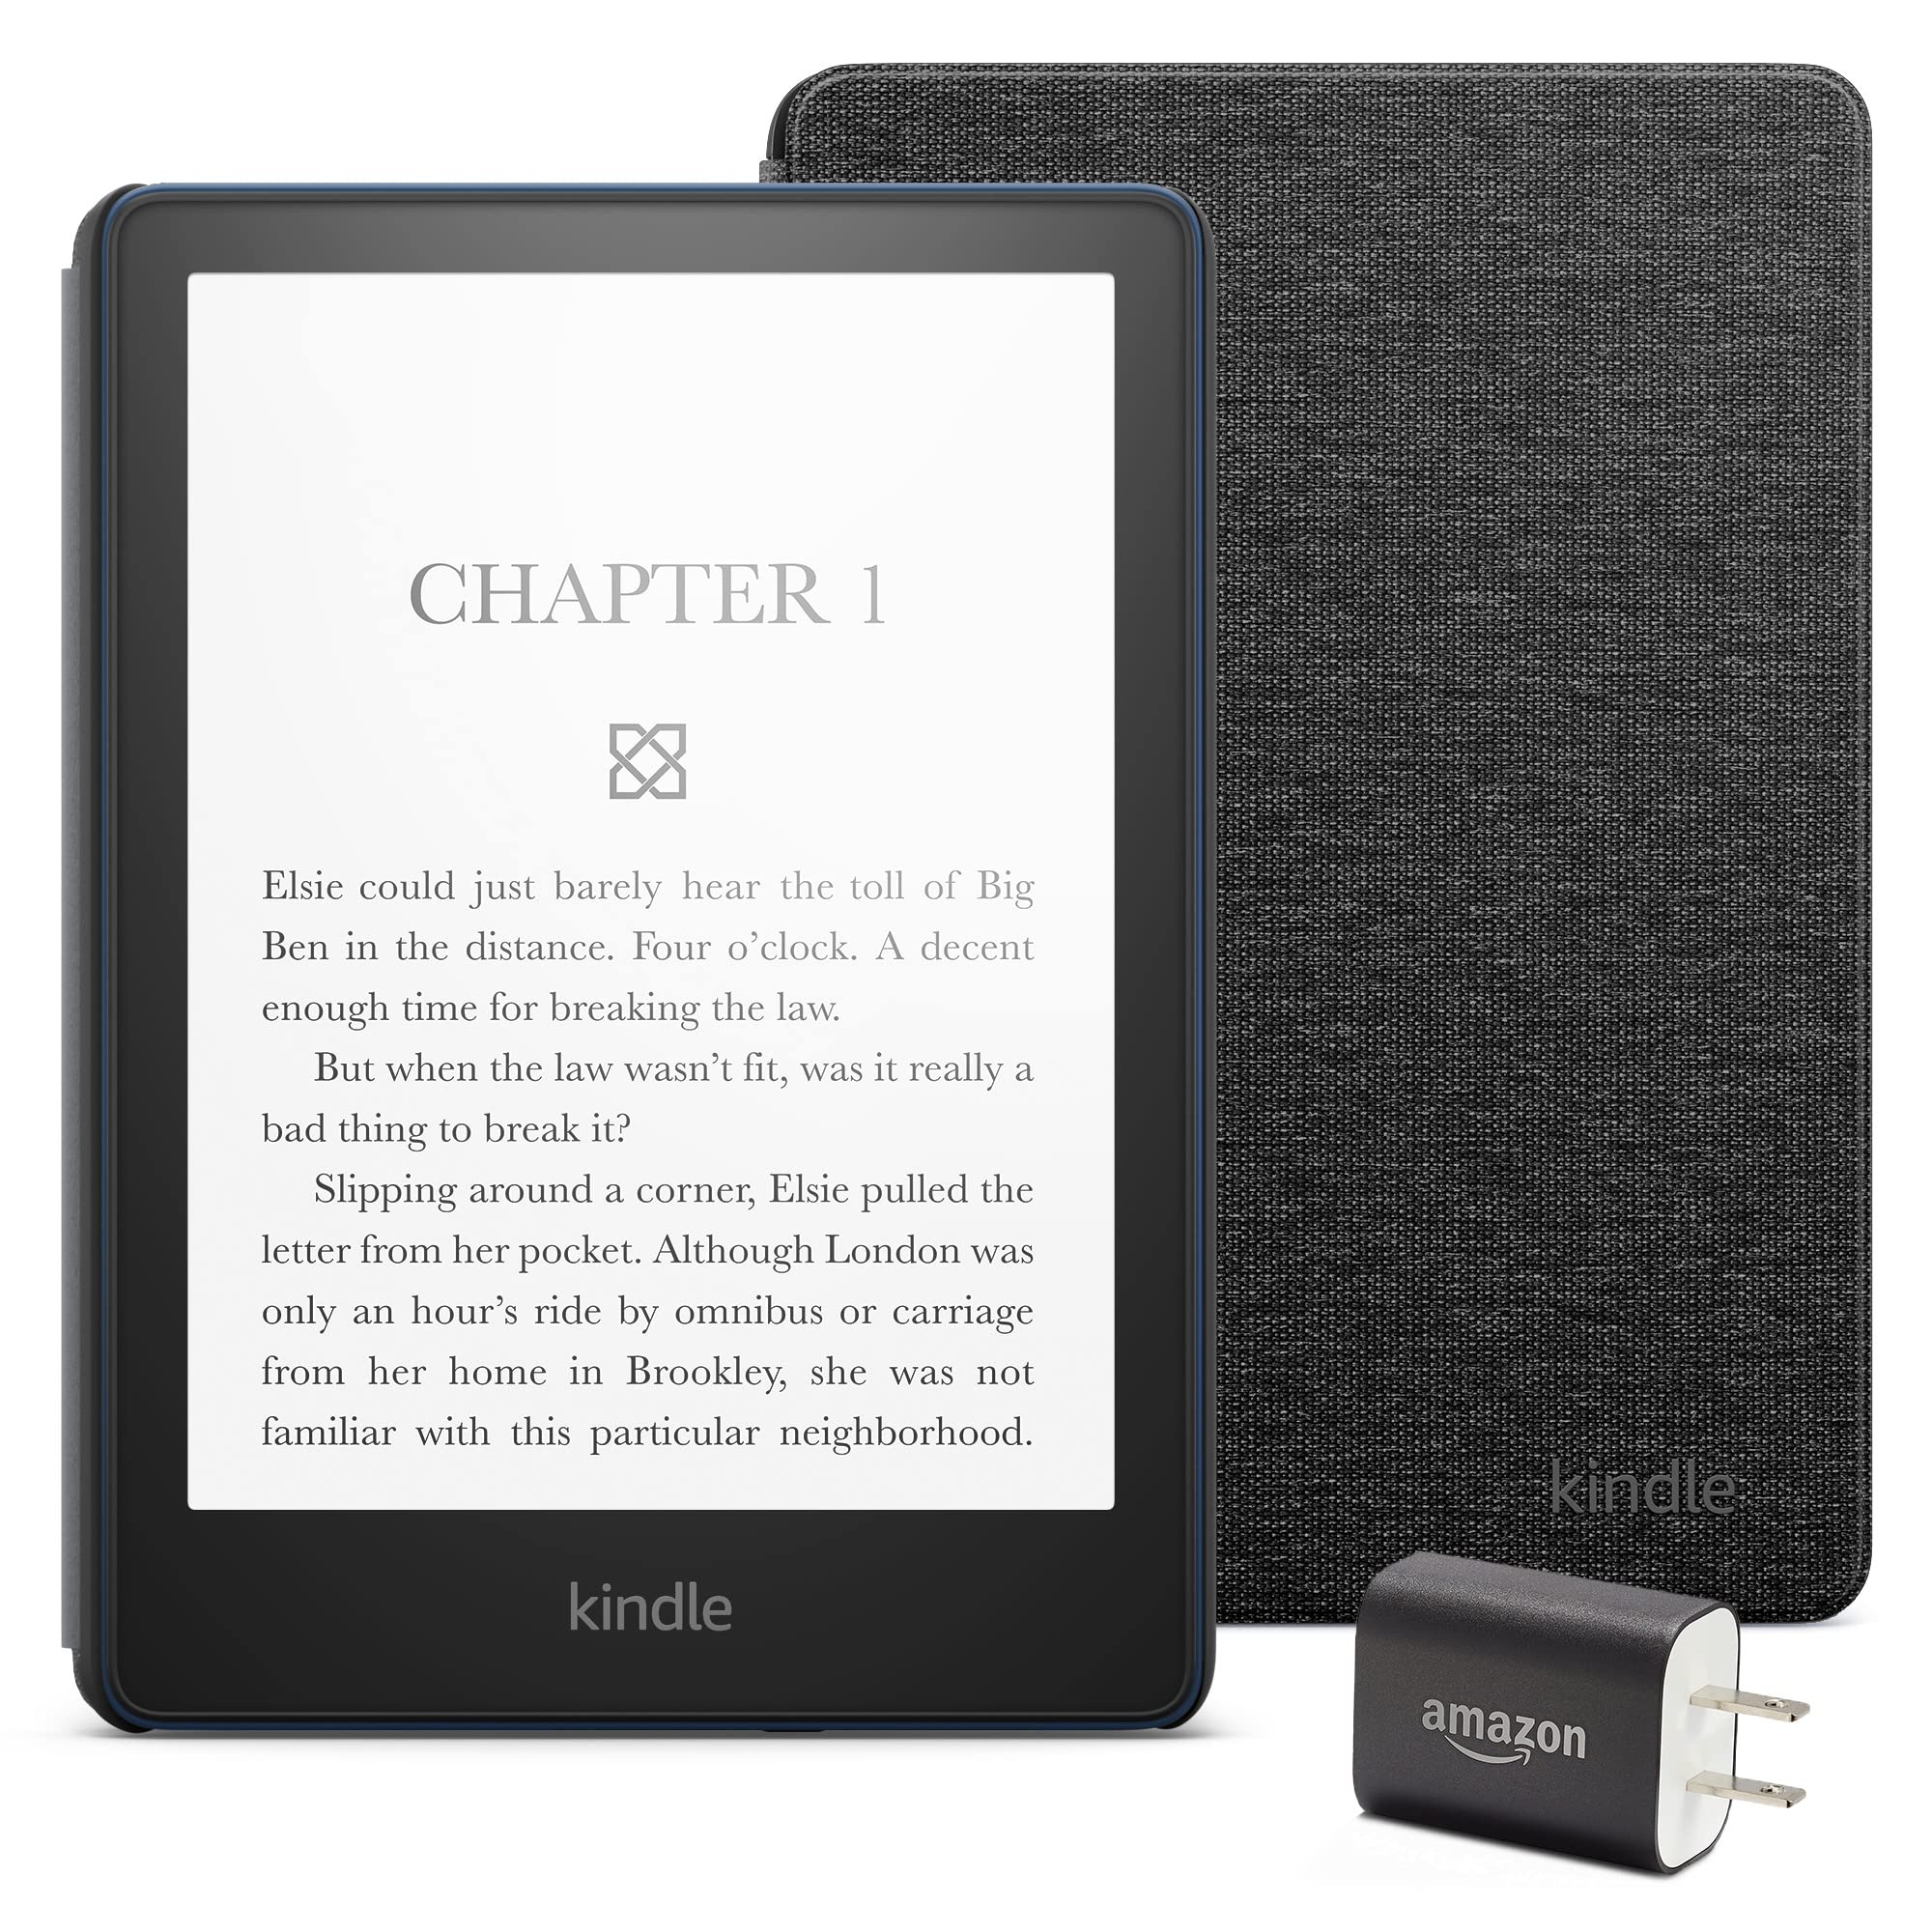 Kindle Paperwhite Essentials Bundle including Kindle Paperwhite (16 GB) - Denim, Fabric Cover - Black, and Power Adapter